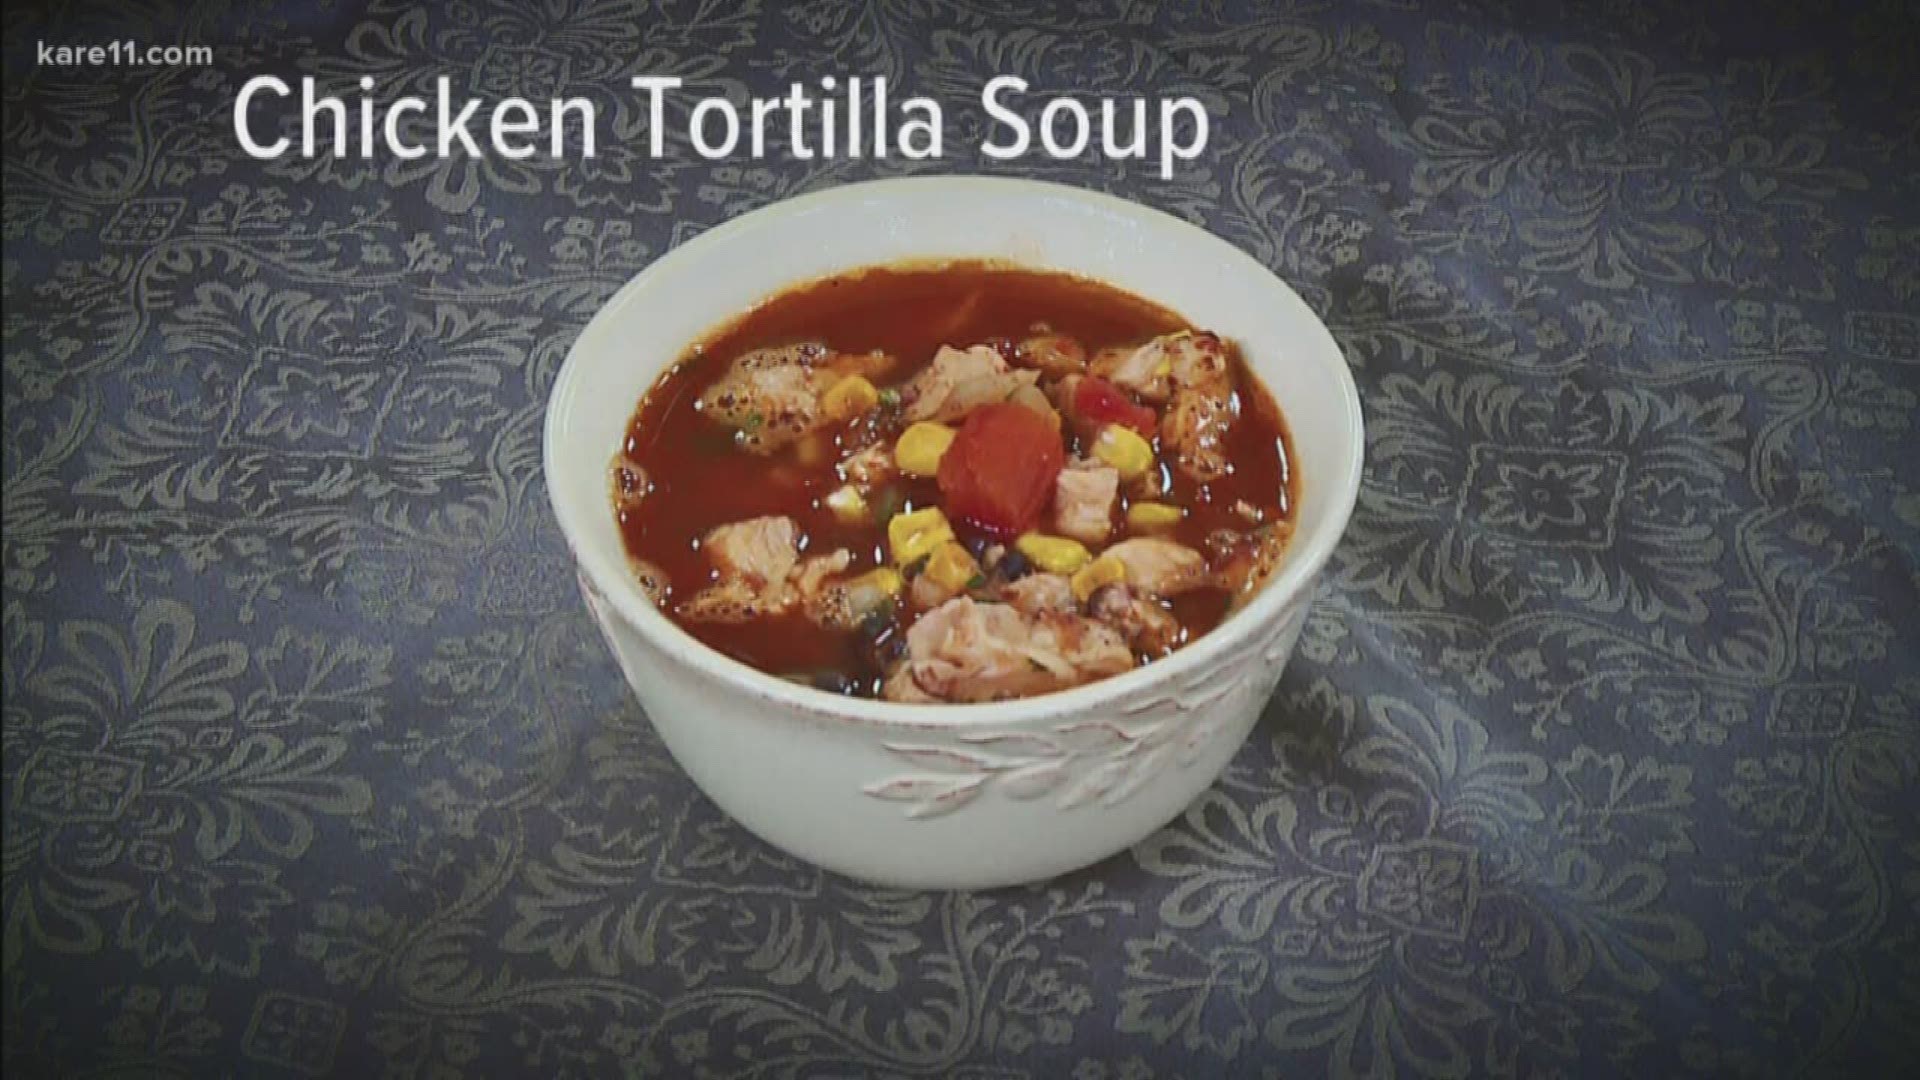 Here's a breakdown on how to make homemade chicken tortilla soup.